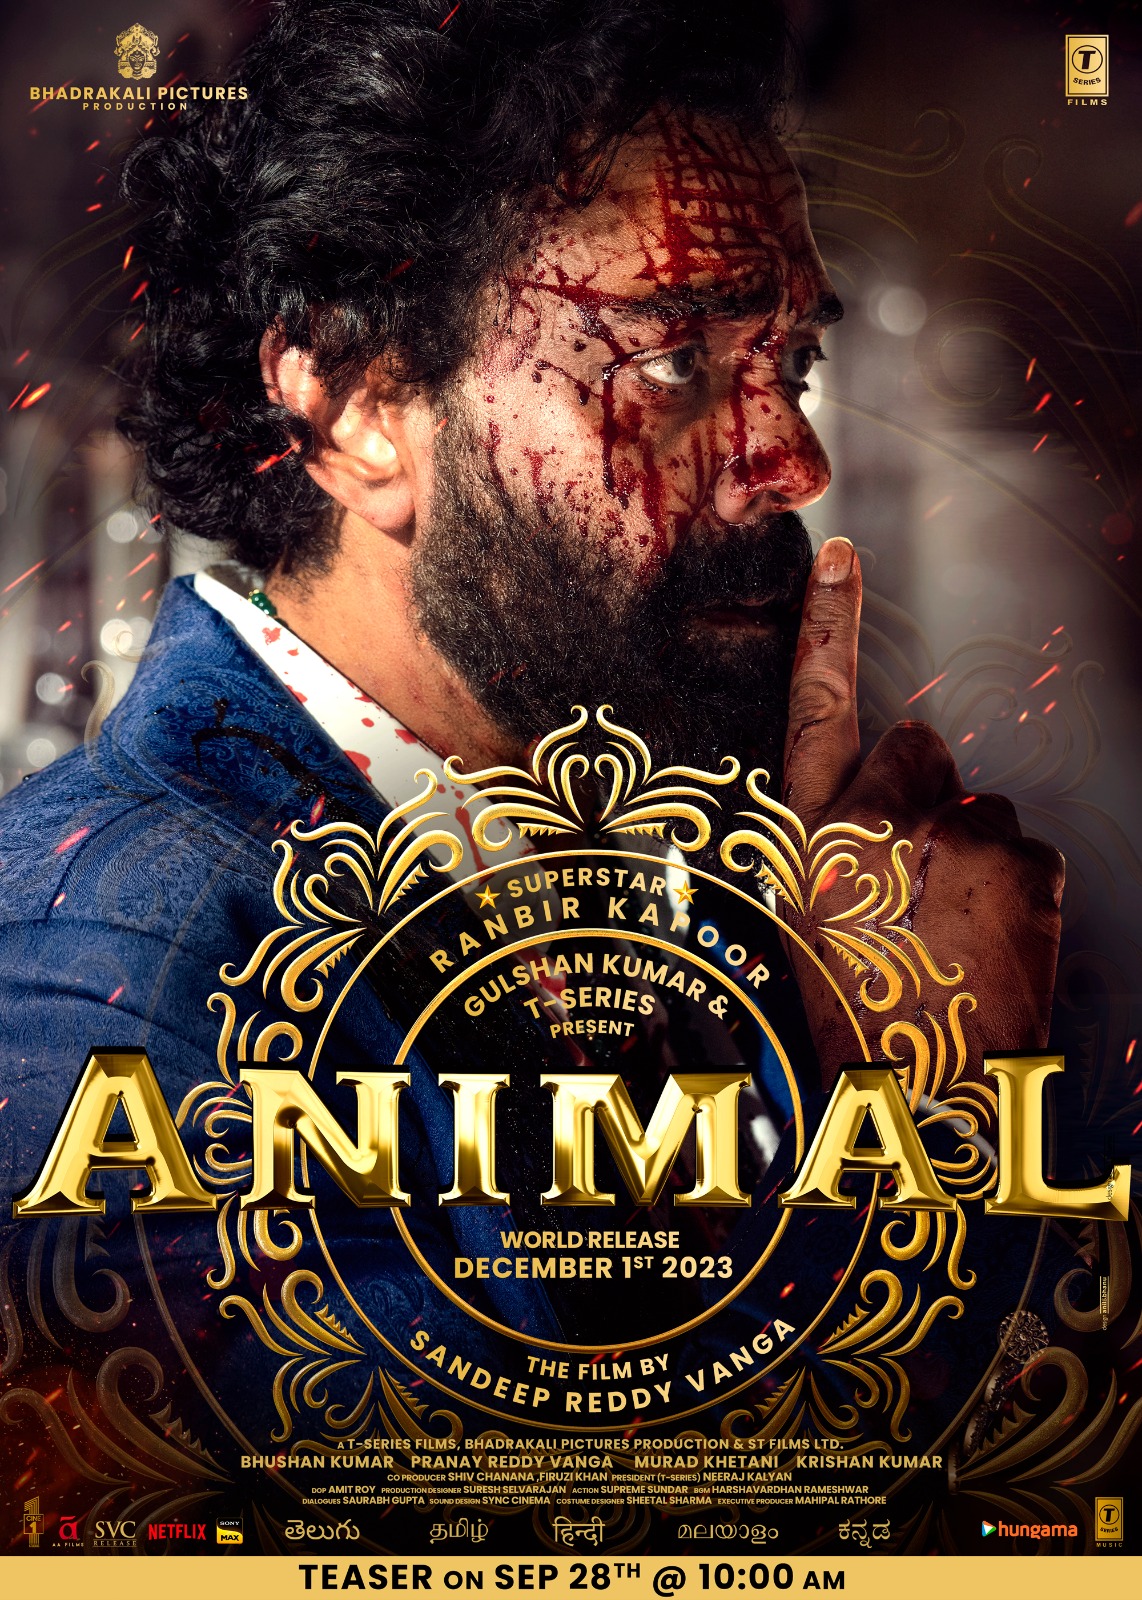 Bobby Deol's first look in Animal